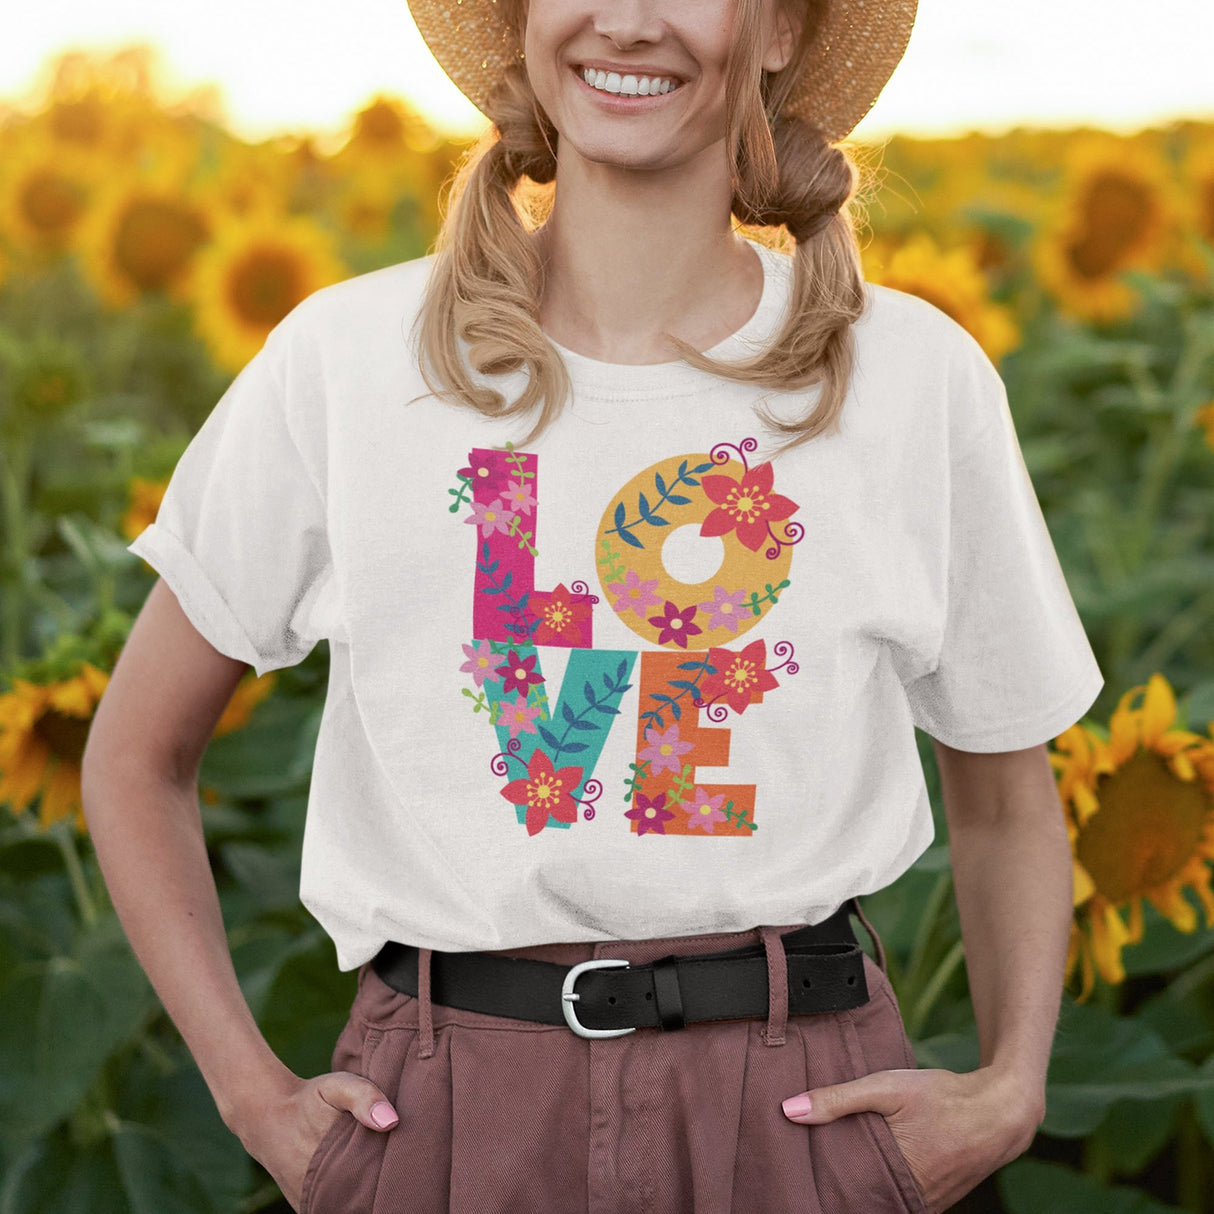 love-love-tee-cute-t-shirt-colorful-tee-girls-t-shirt-four-letter-word-tee#color_white